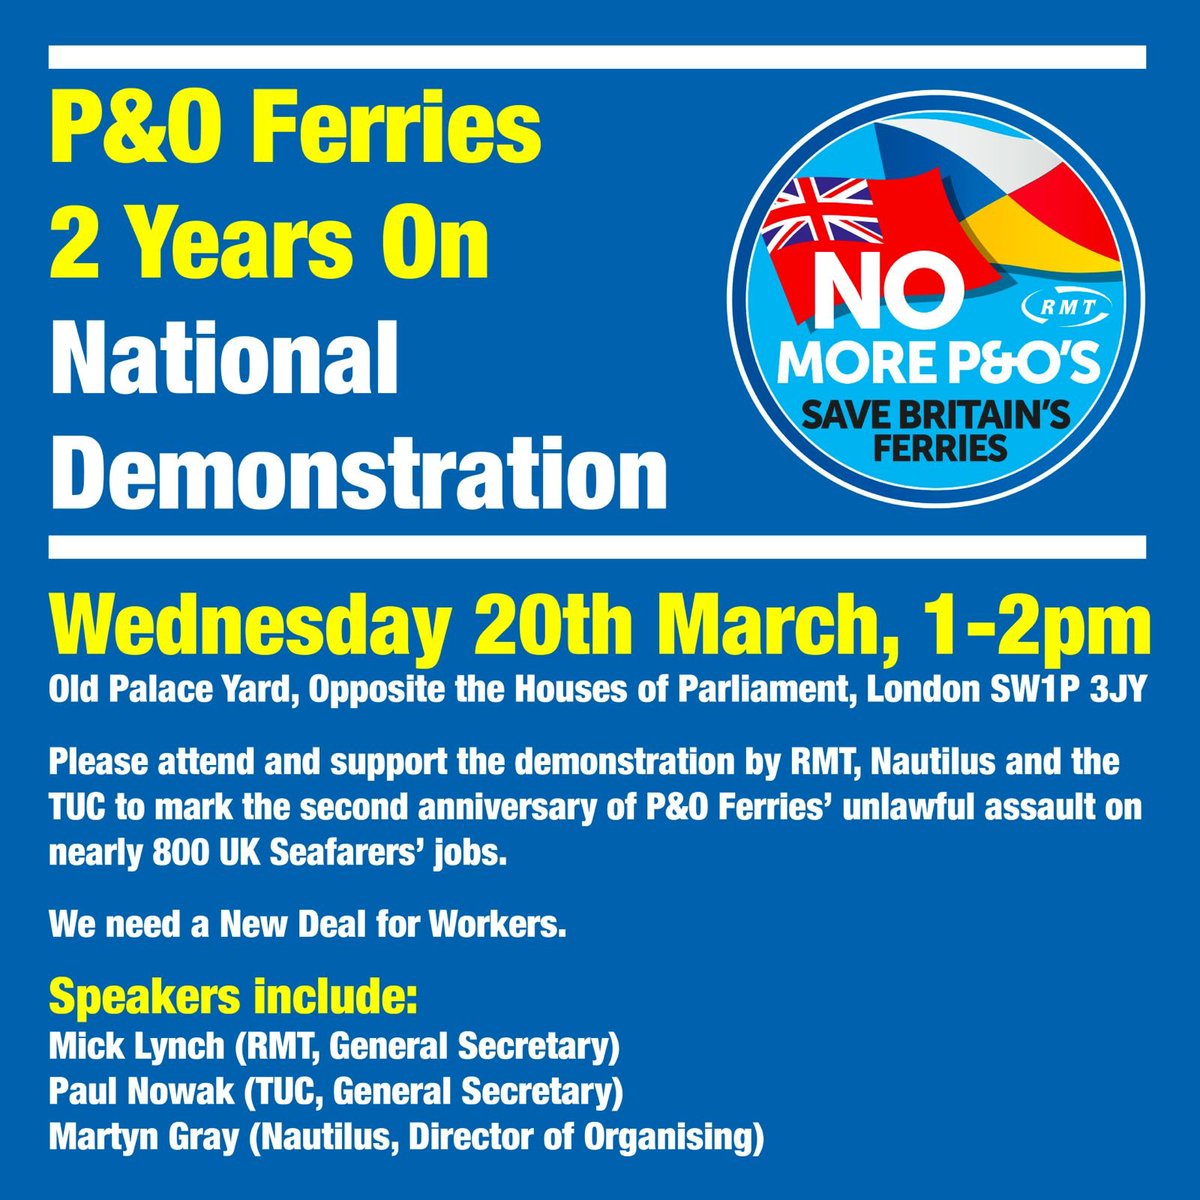 NATIONAL DEMO 🚨| P&O: 2 Years On 800 P&O workers were sacked illegally - we need a New Deal for Workers! Join @Nowak_Paul, Mick Lynch and @MartynGray at the national demonstration. 📅 This Wednesday 20th March 🕐 1-2pm 📍 Old Palace Yard, London. Join us - all welcome.